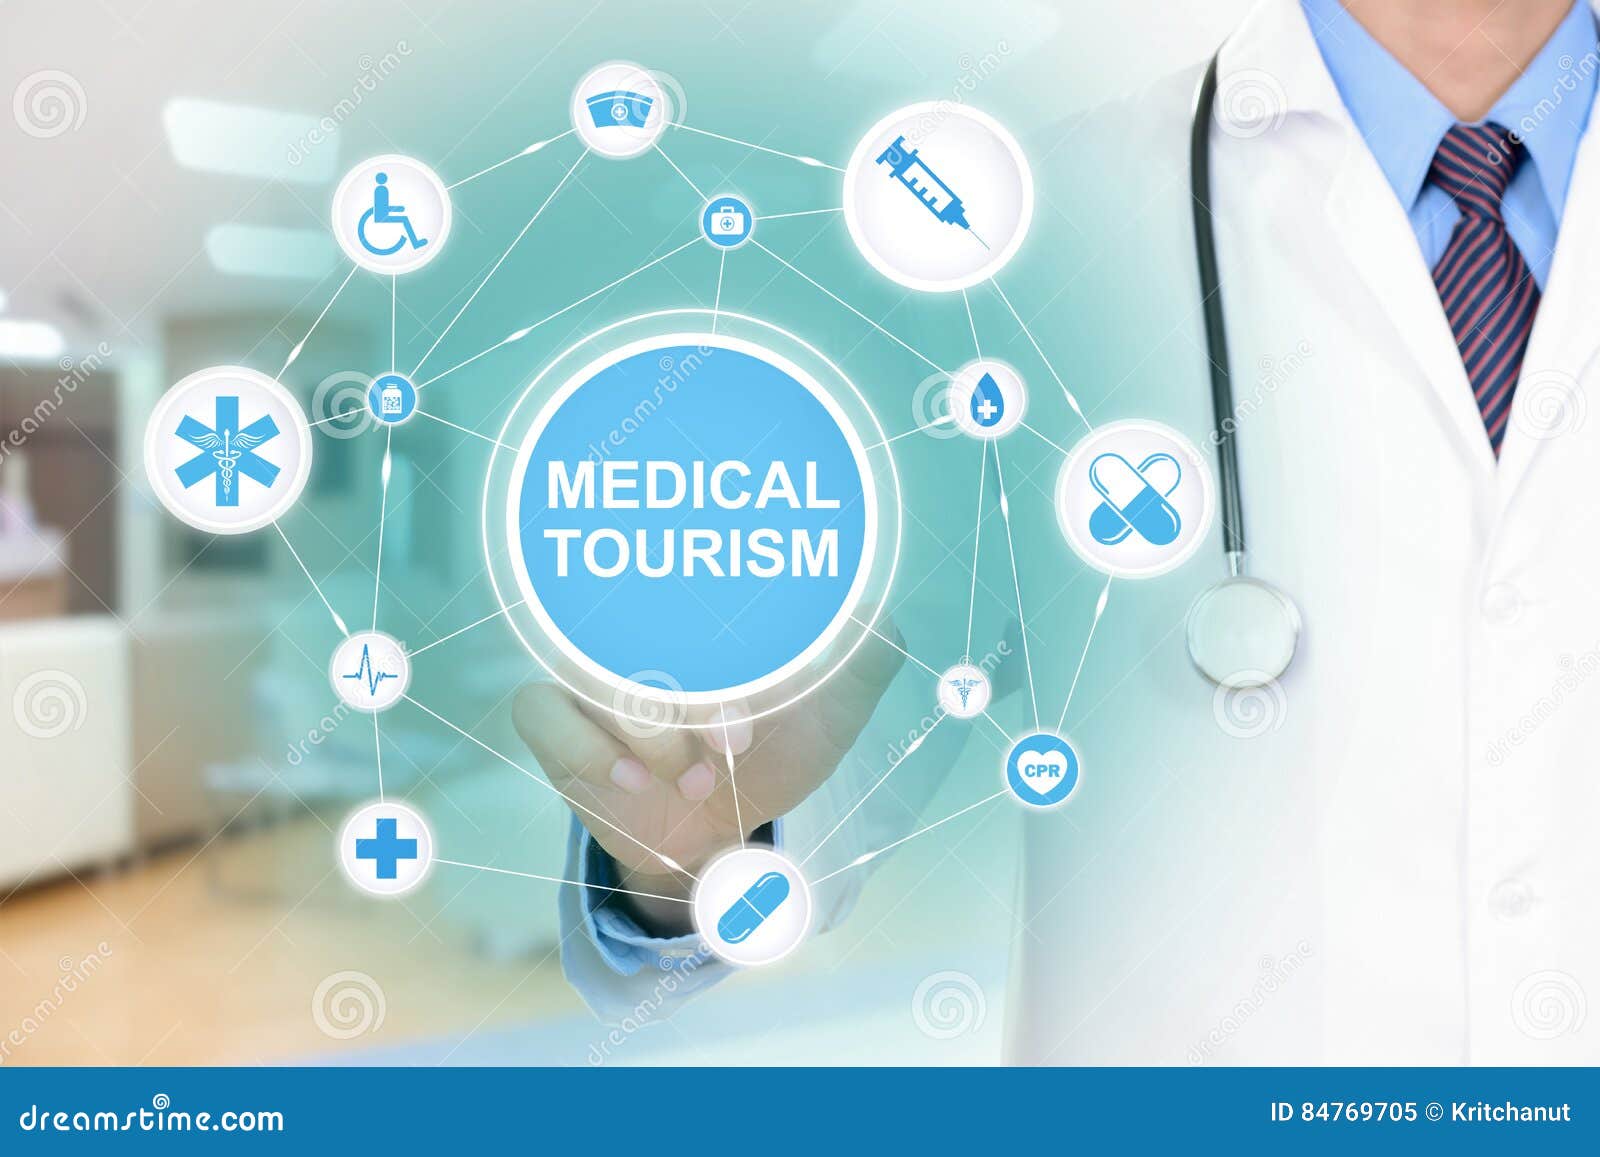 doctor hand touching medical tourism sign virtual screen